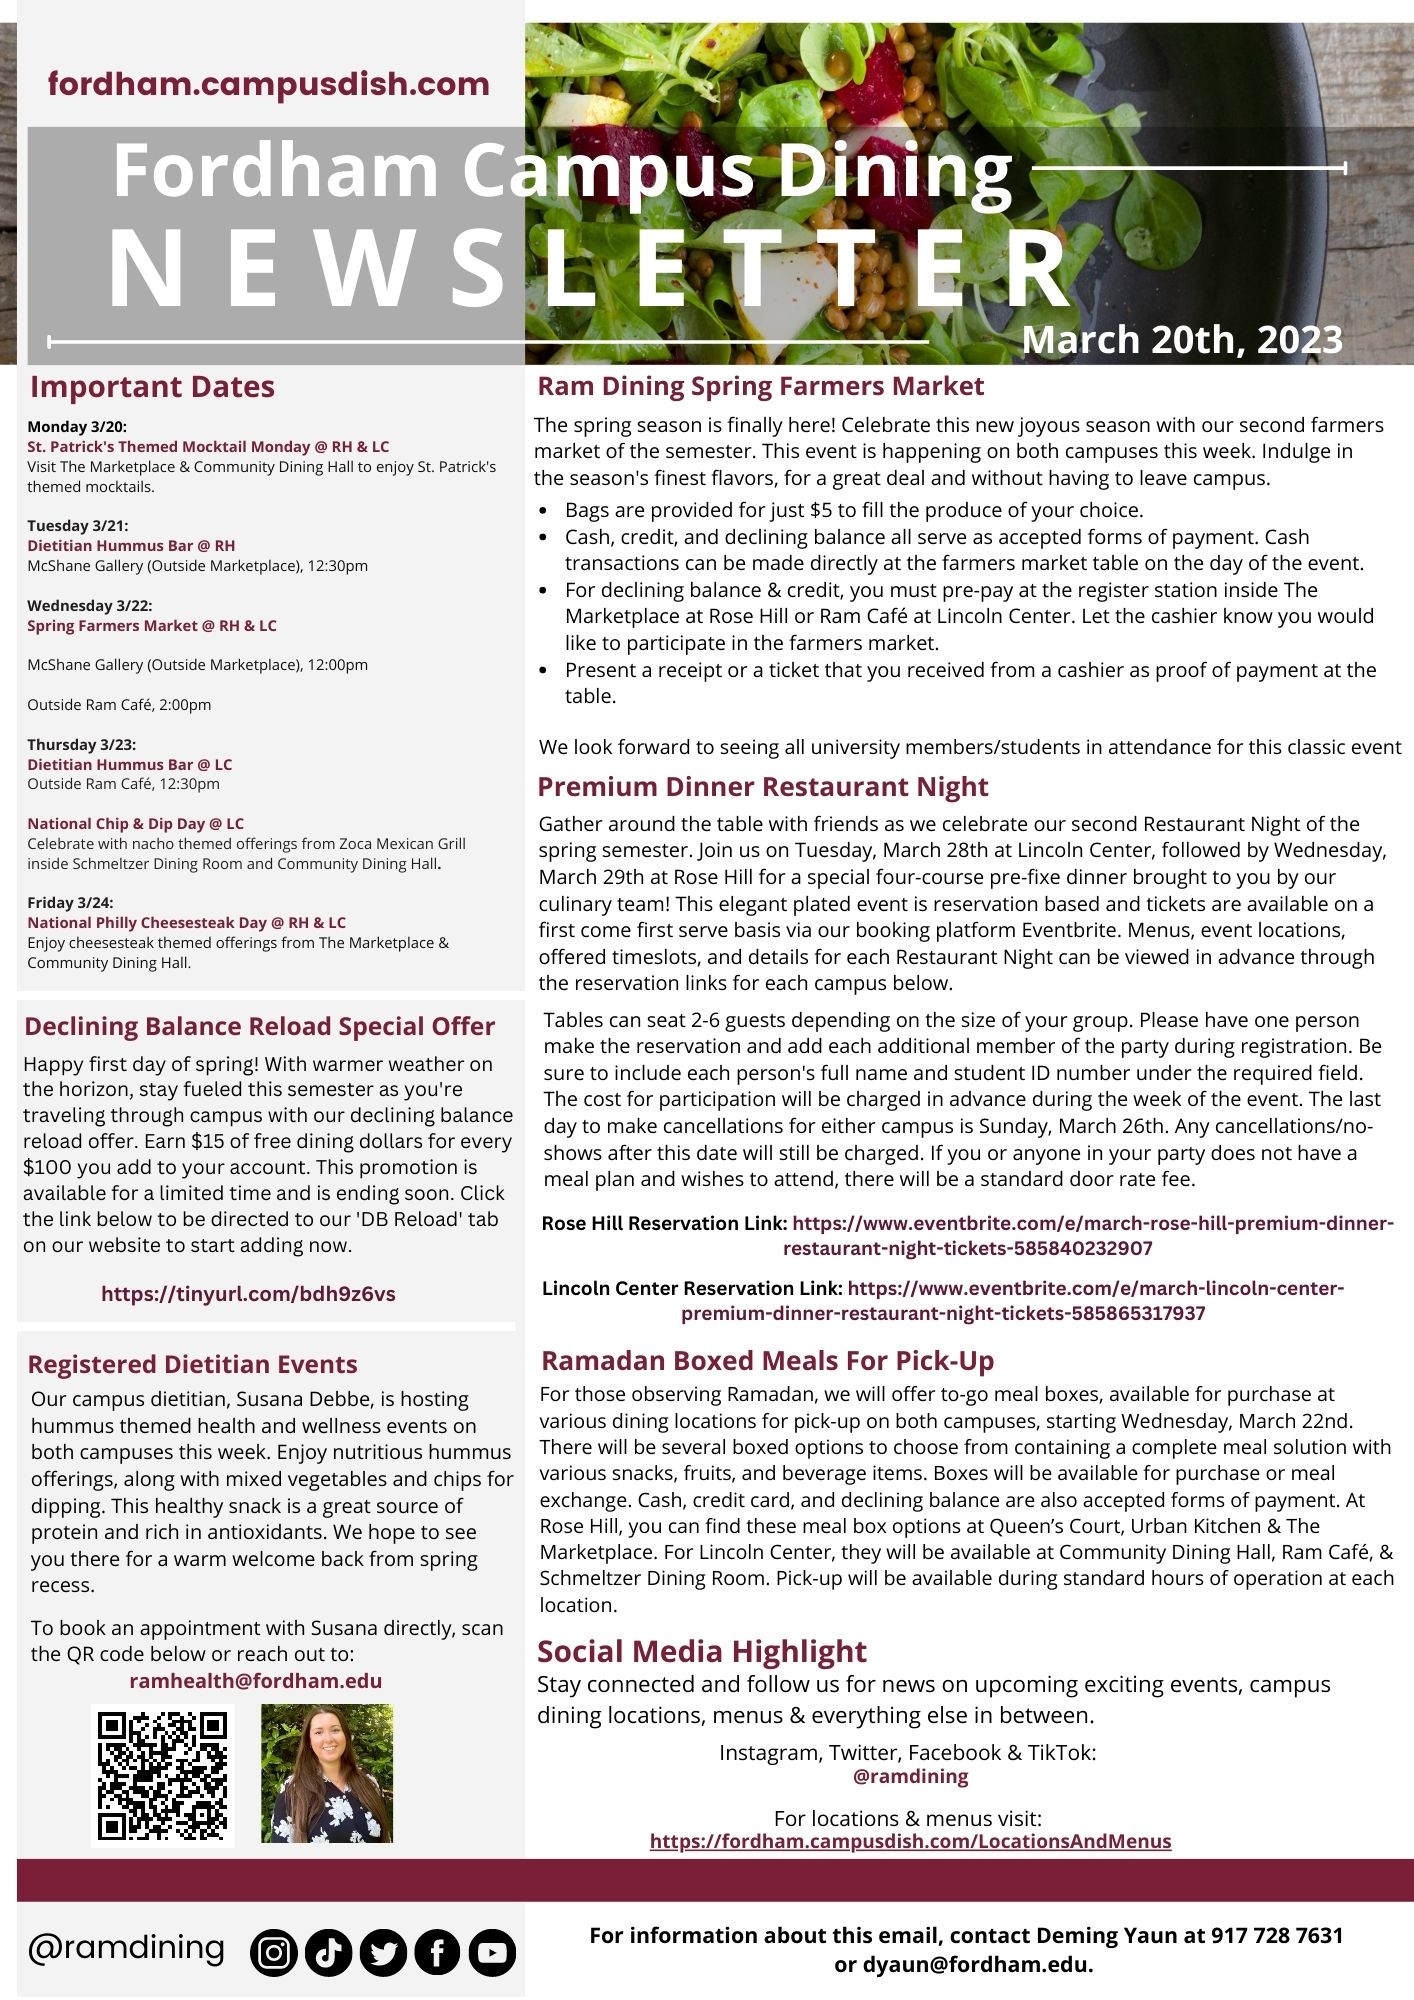 Fordham Campus Dining Newsletter March 20th, 2023